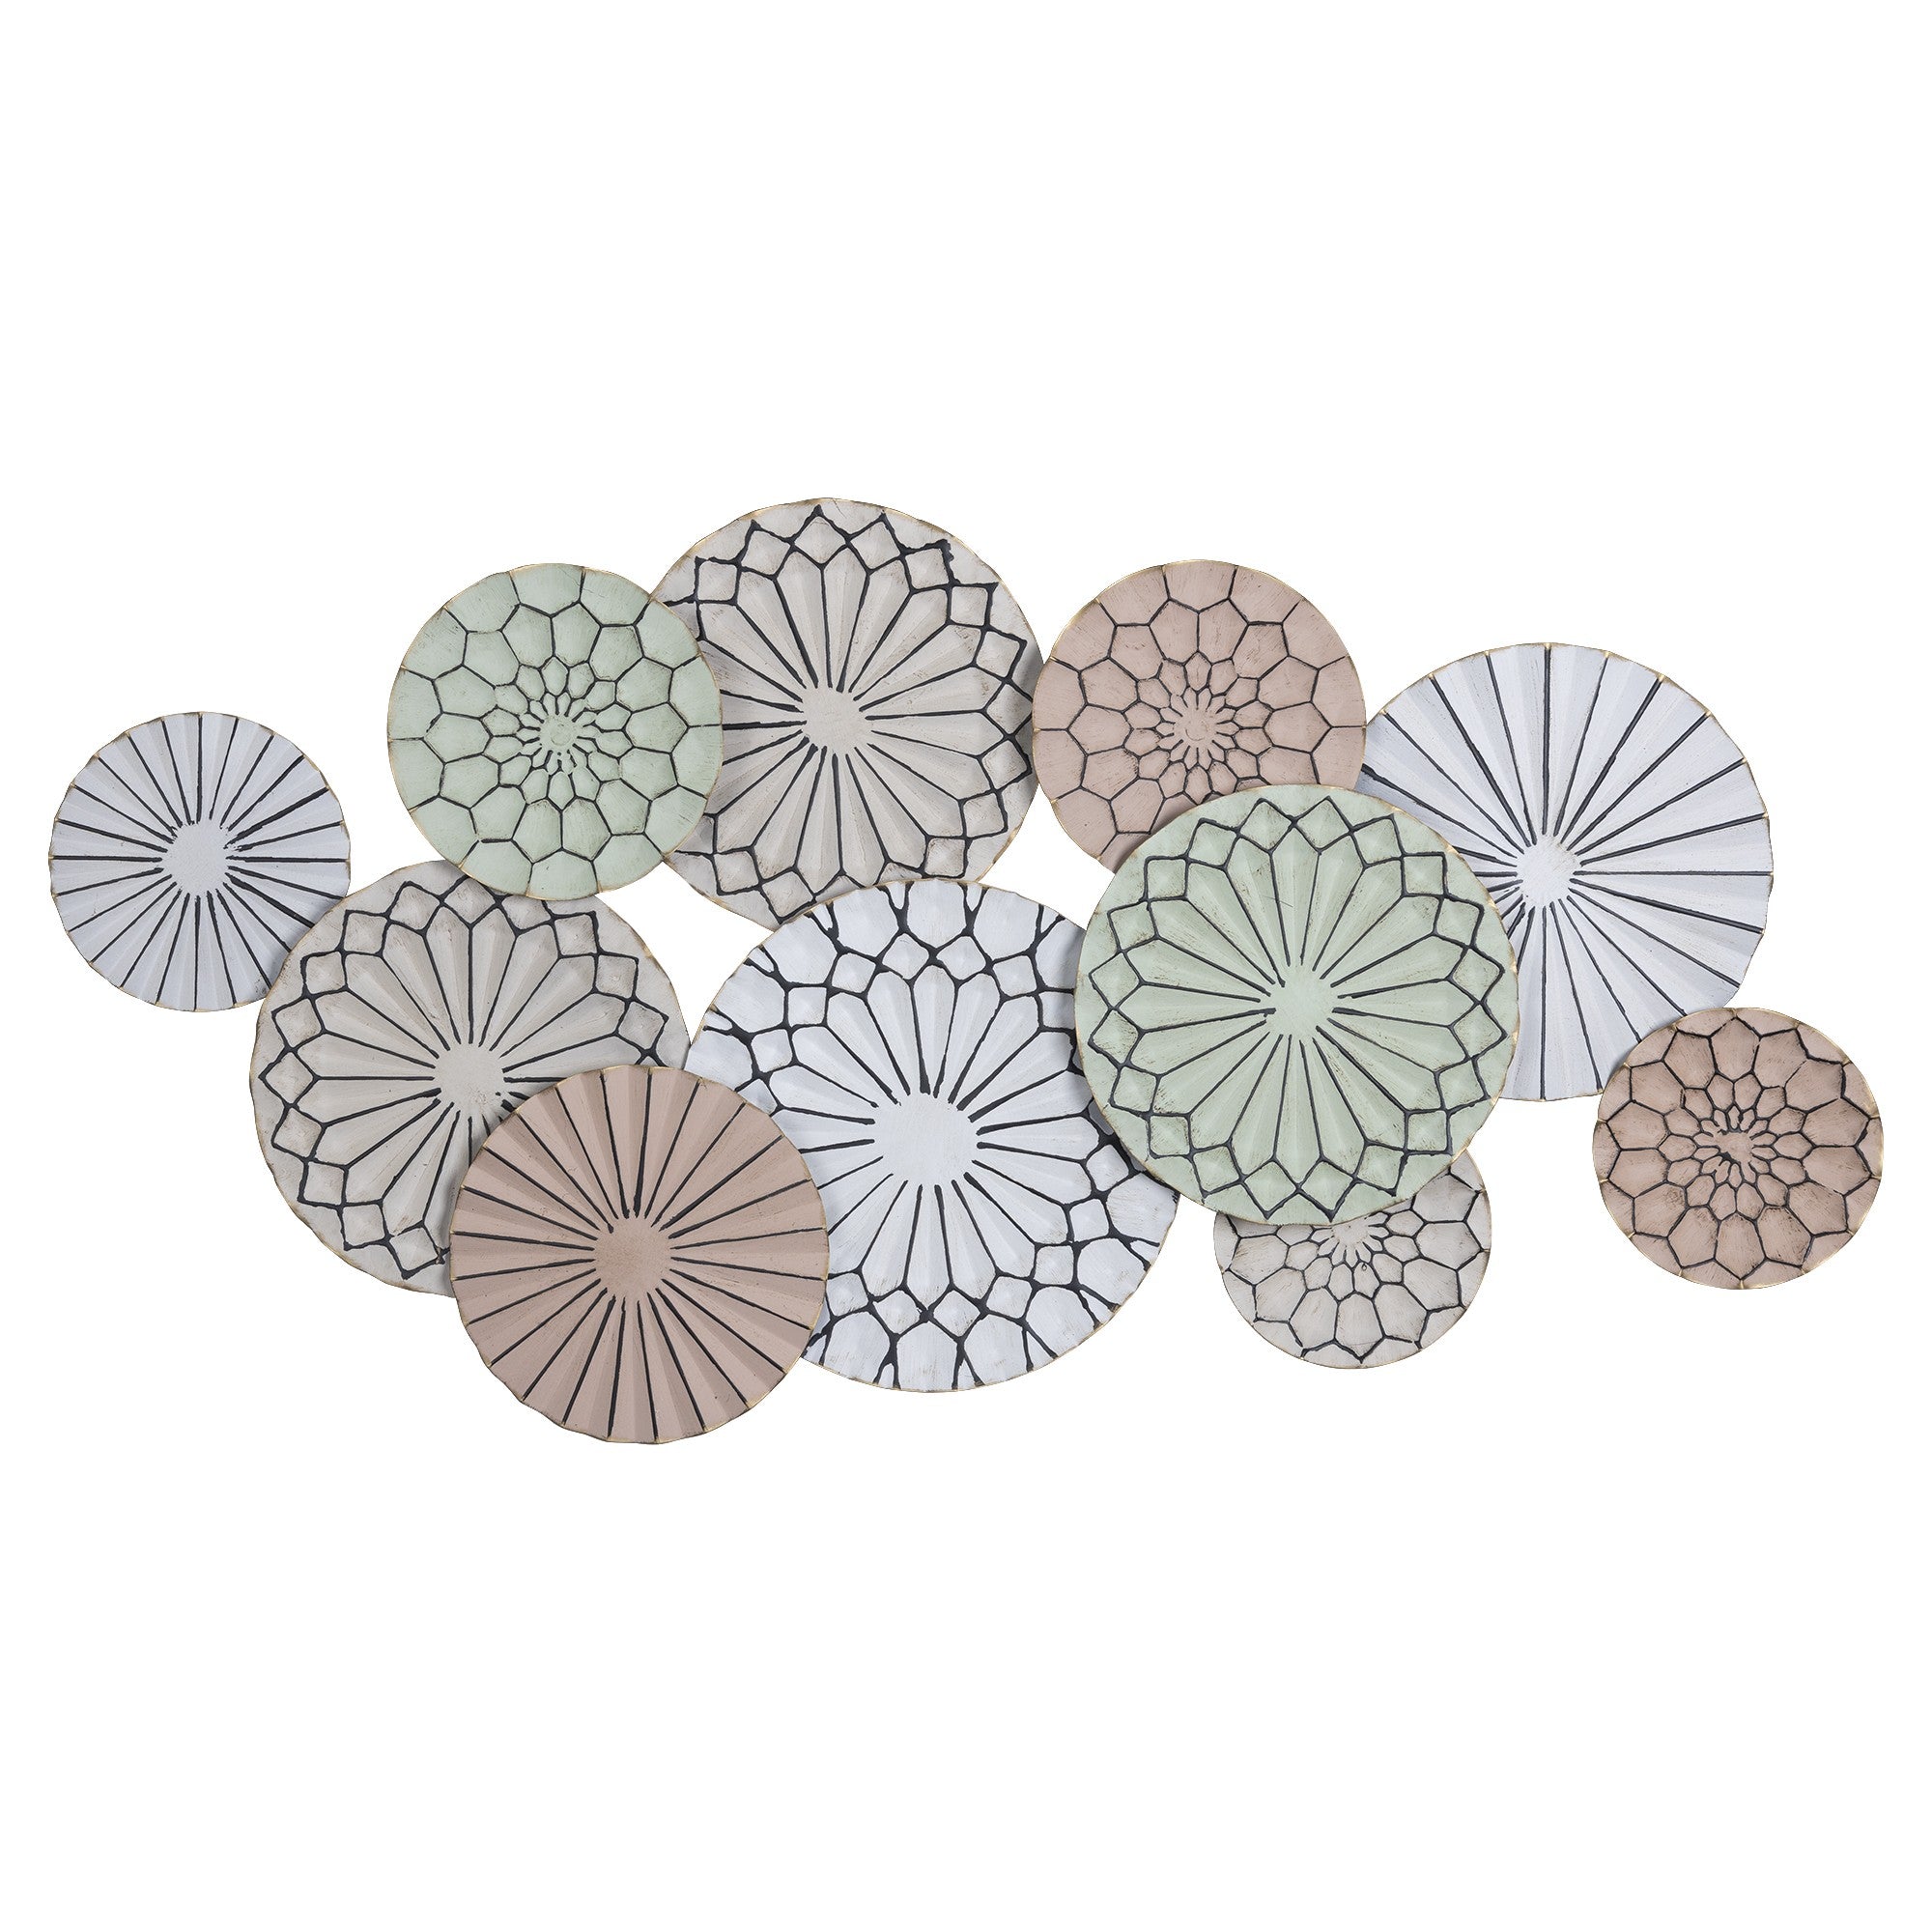 Colorful Floral Design Metal Wall Decor